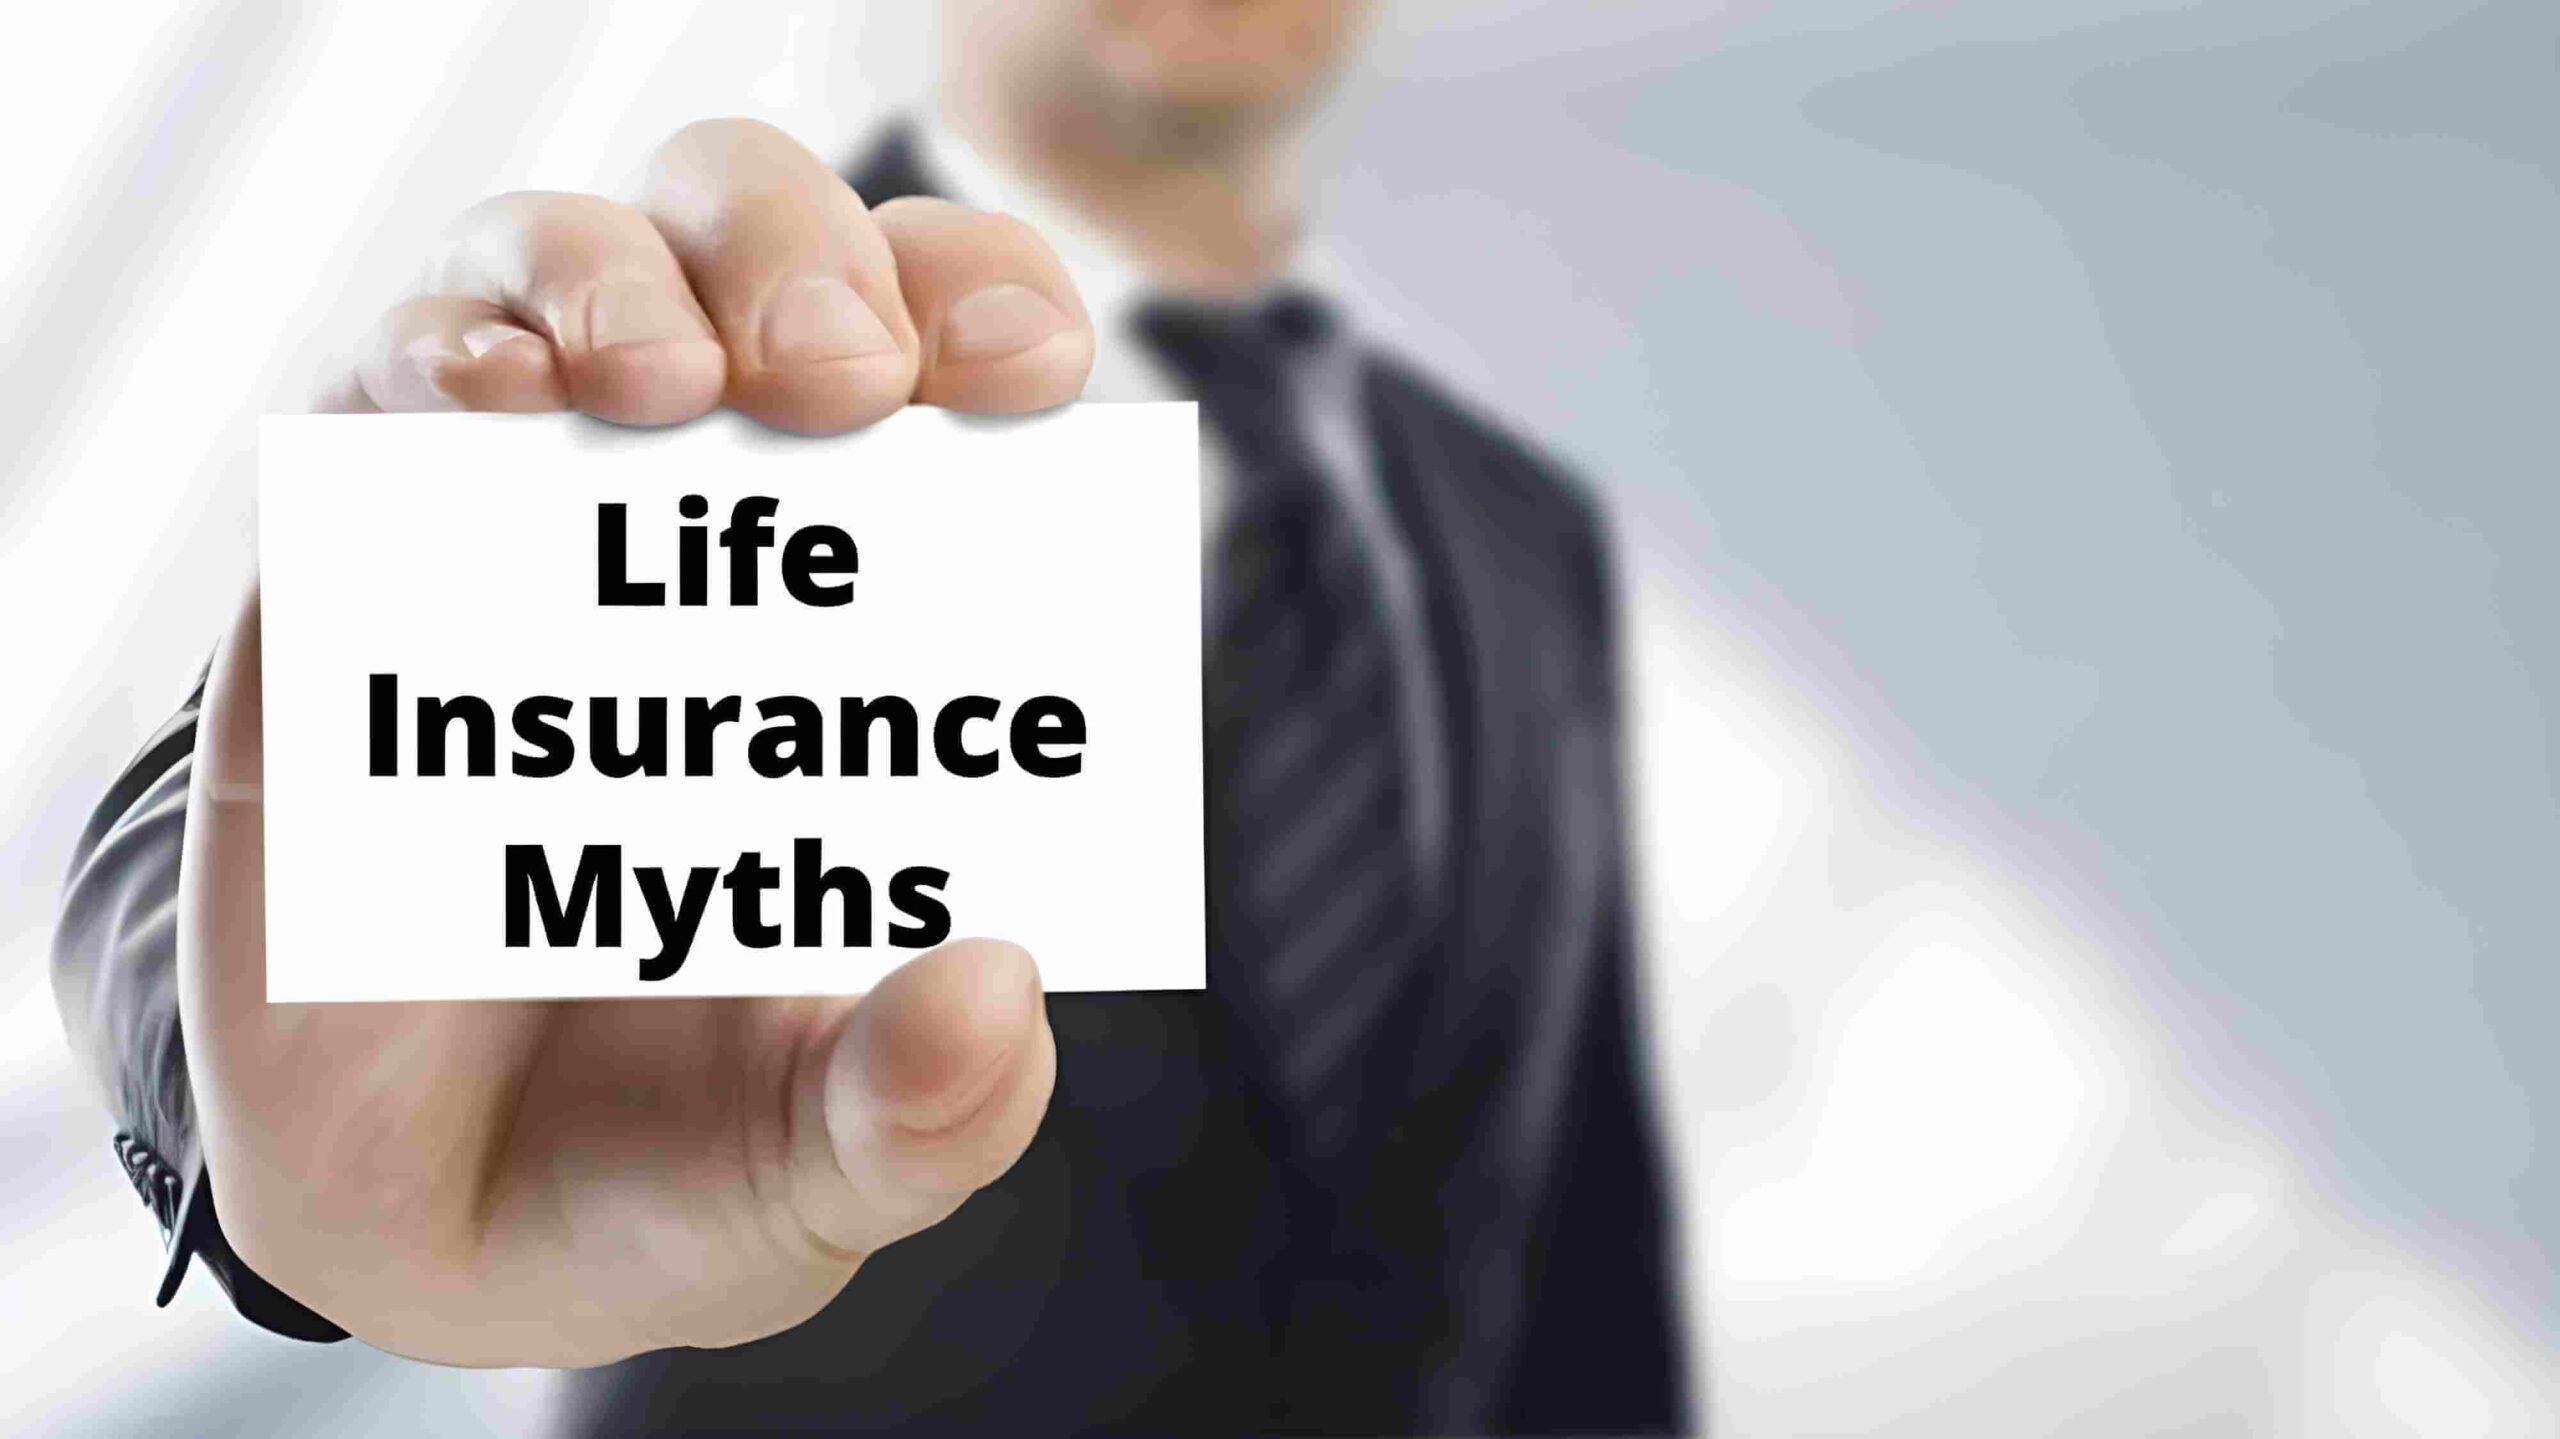 Debunking the Myths about Life Insurance